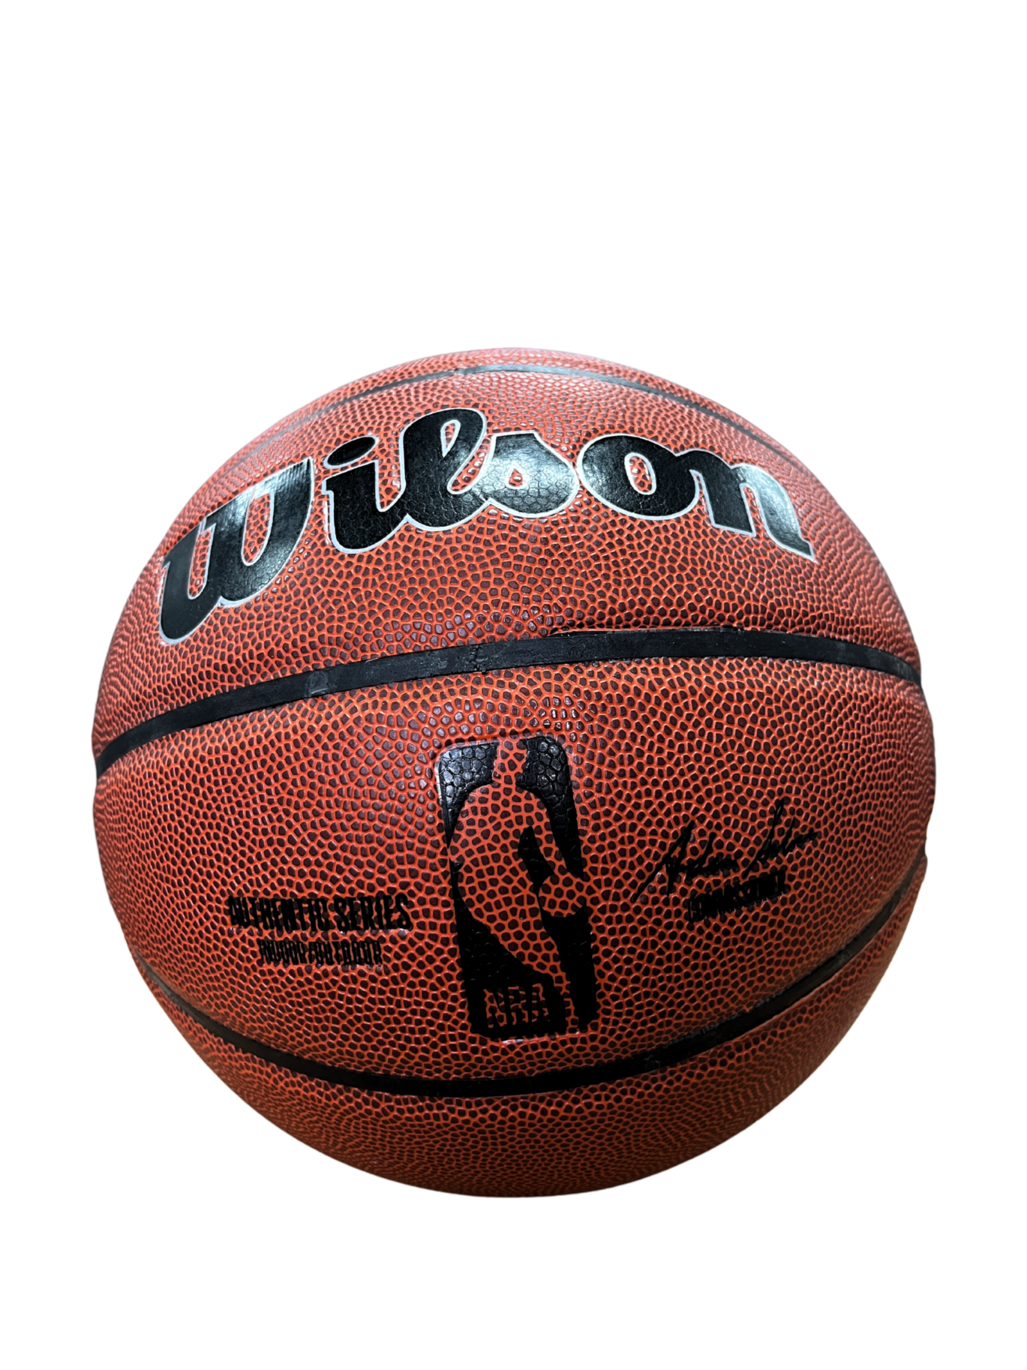 Wilson Authentic Series All-Court Basketball Match-Ball Size 7